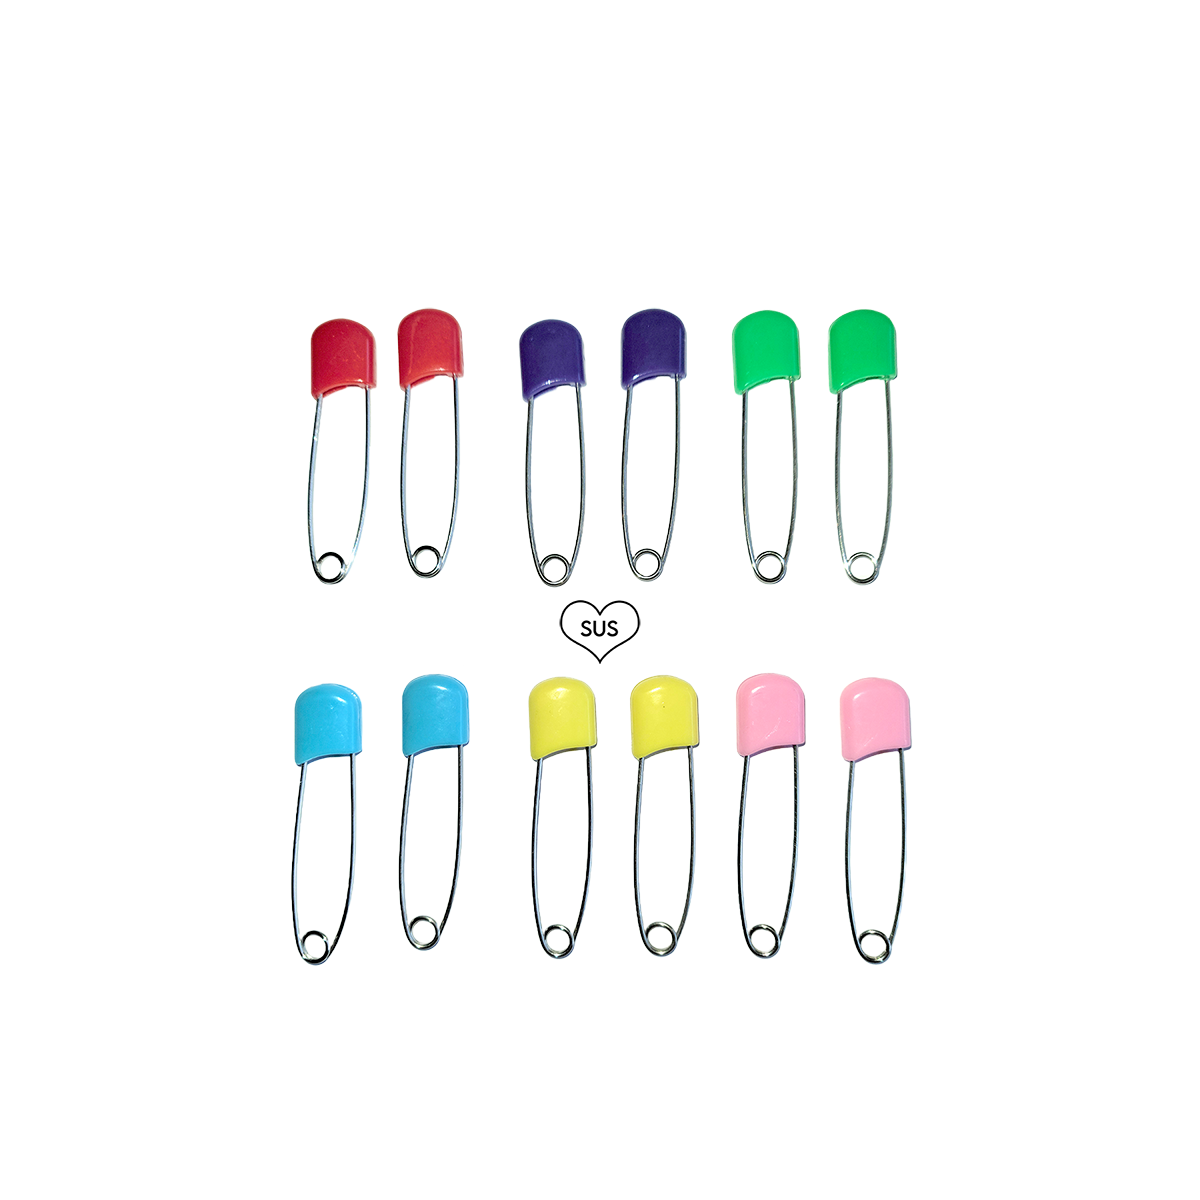 Colorful Diaper Safety Pins (set of 12)